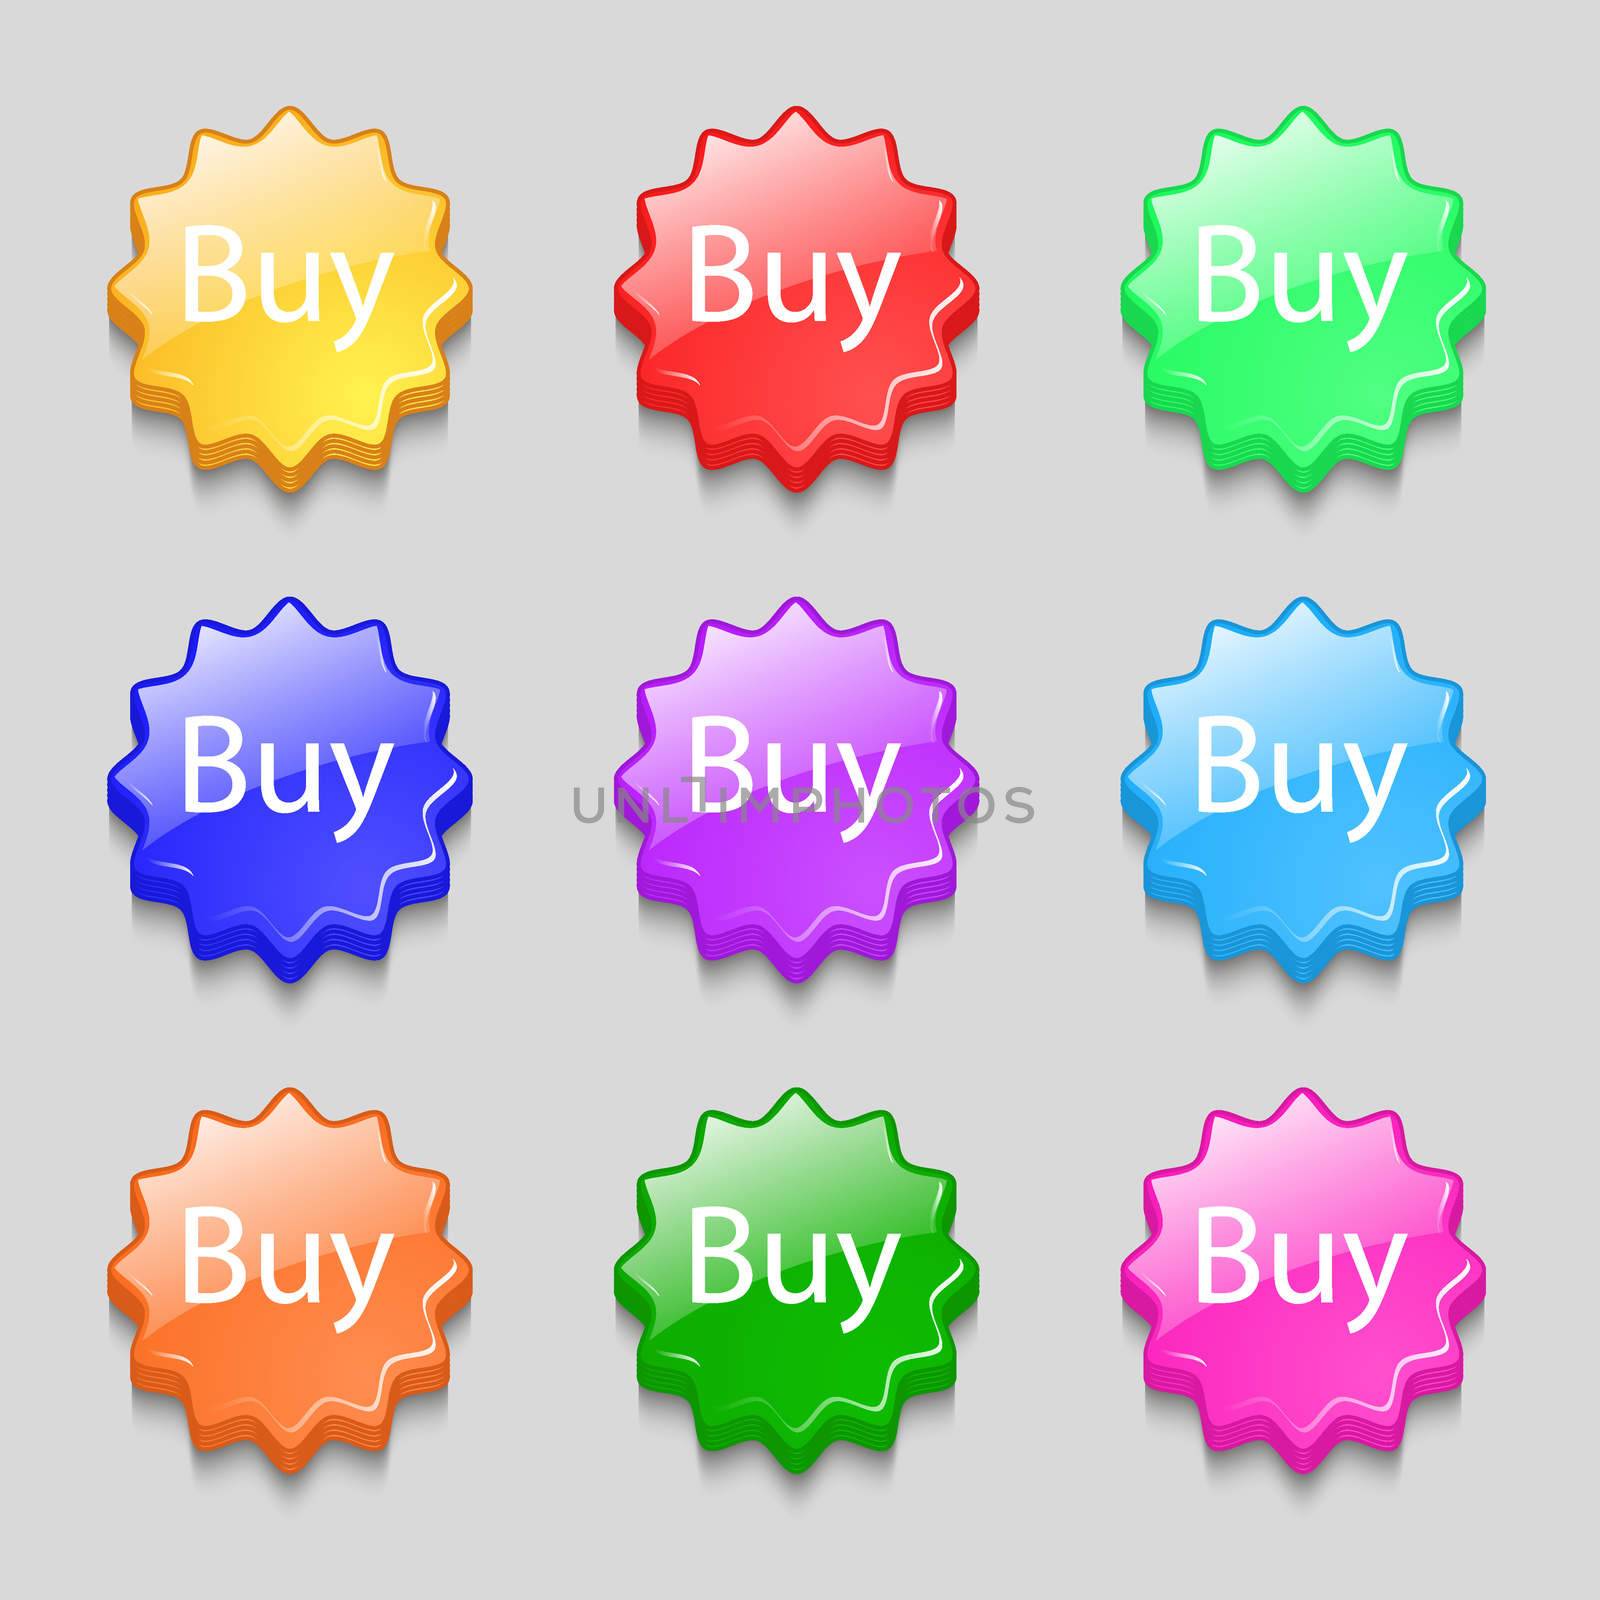 Buy sign icon. Online buying dollar usd button. Symbols on nine wavy colourful buttons. illustration